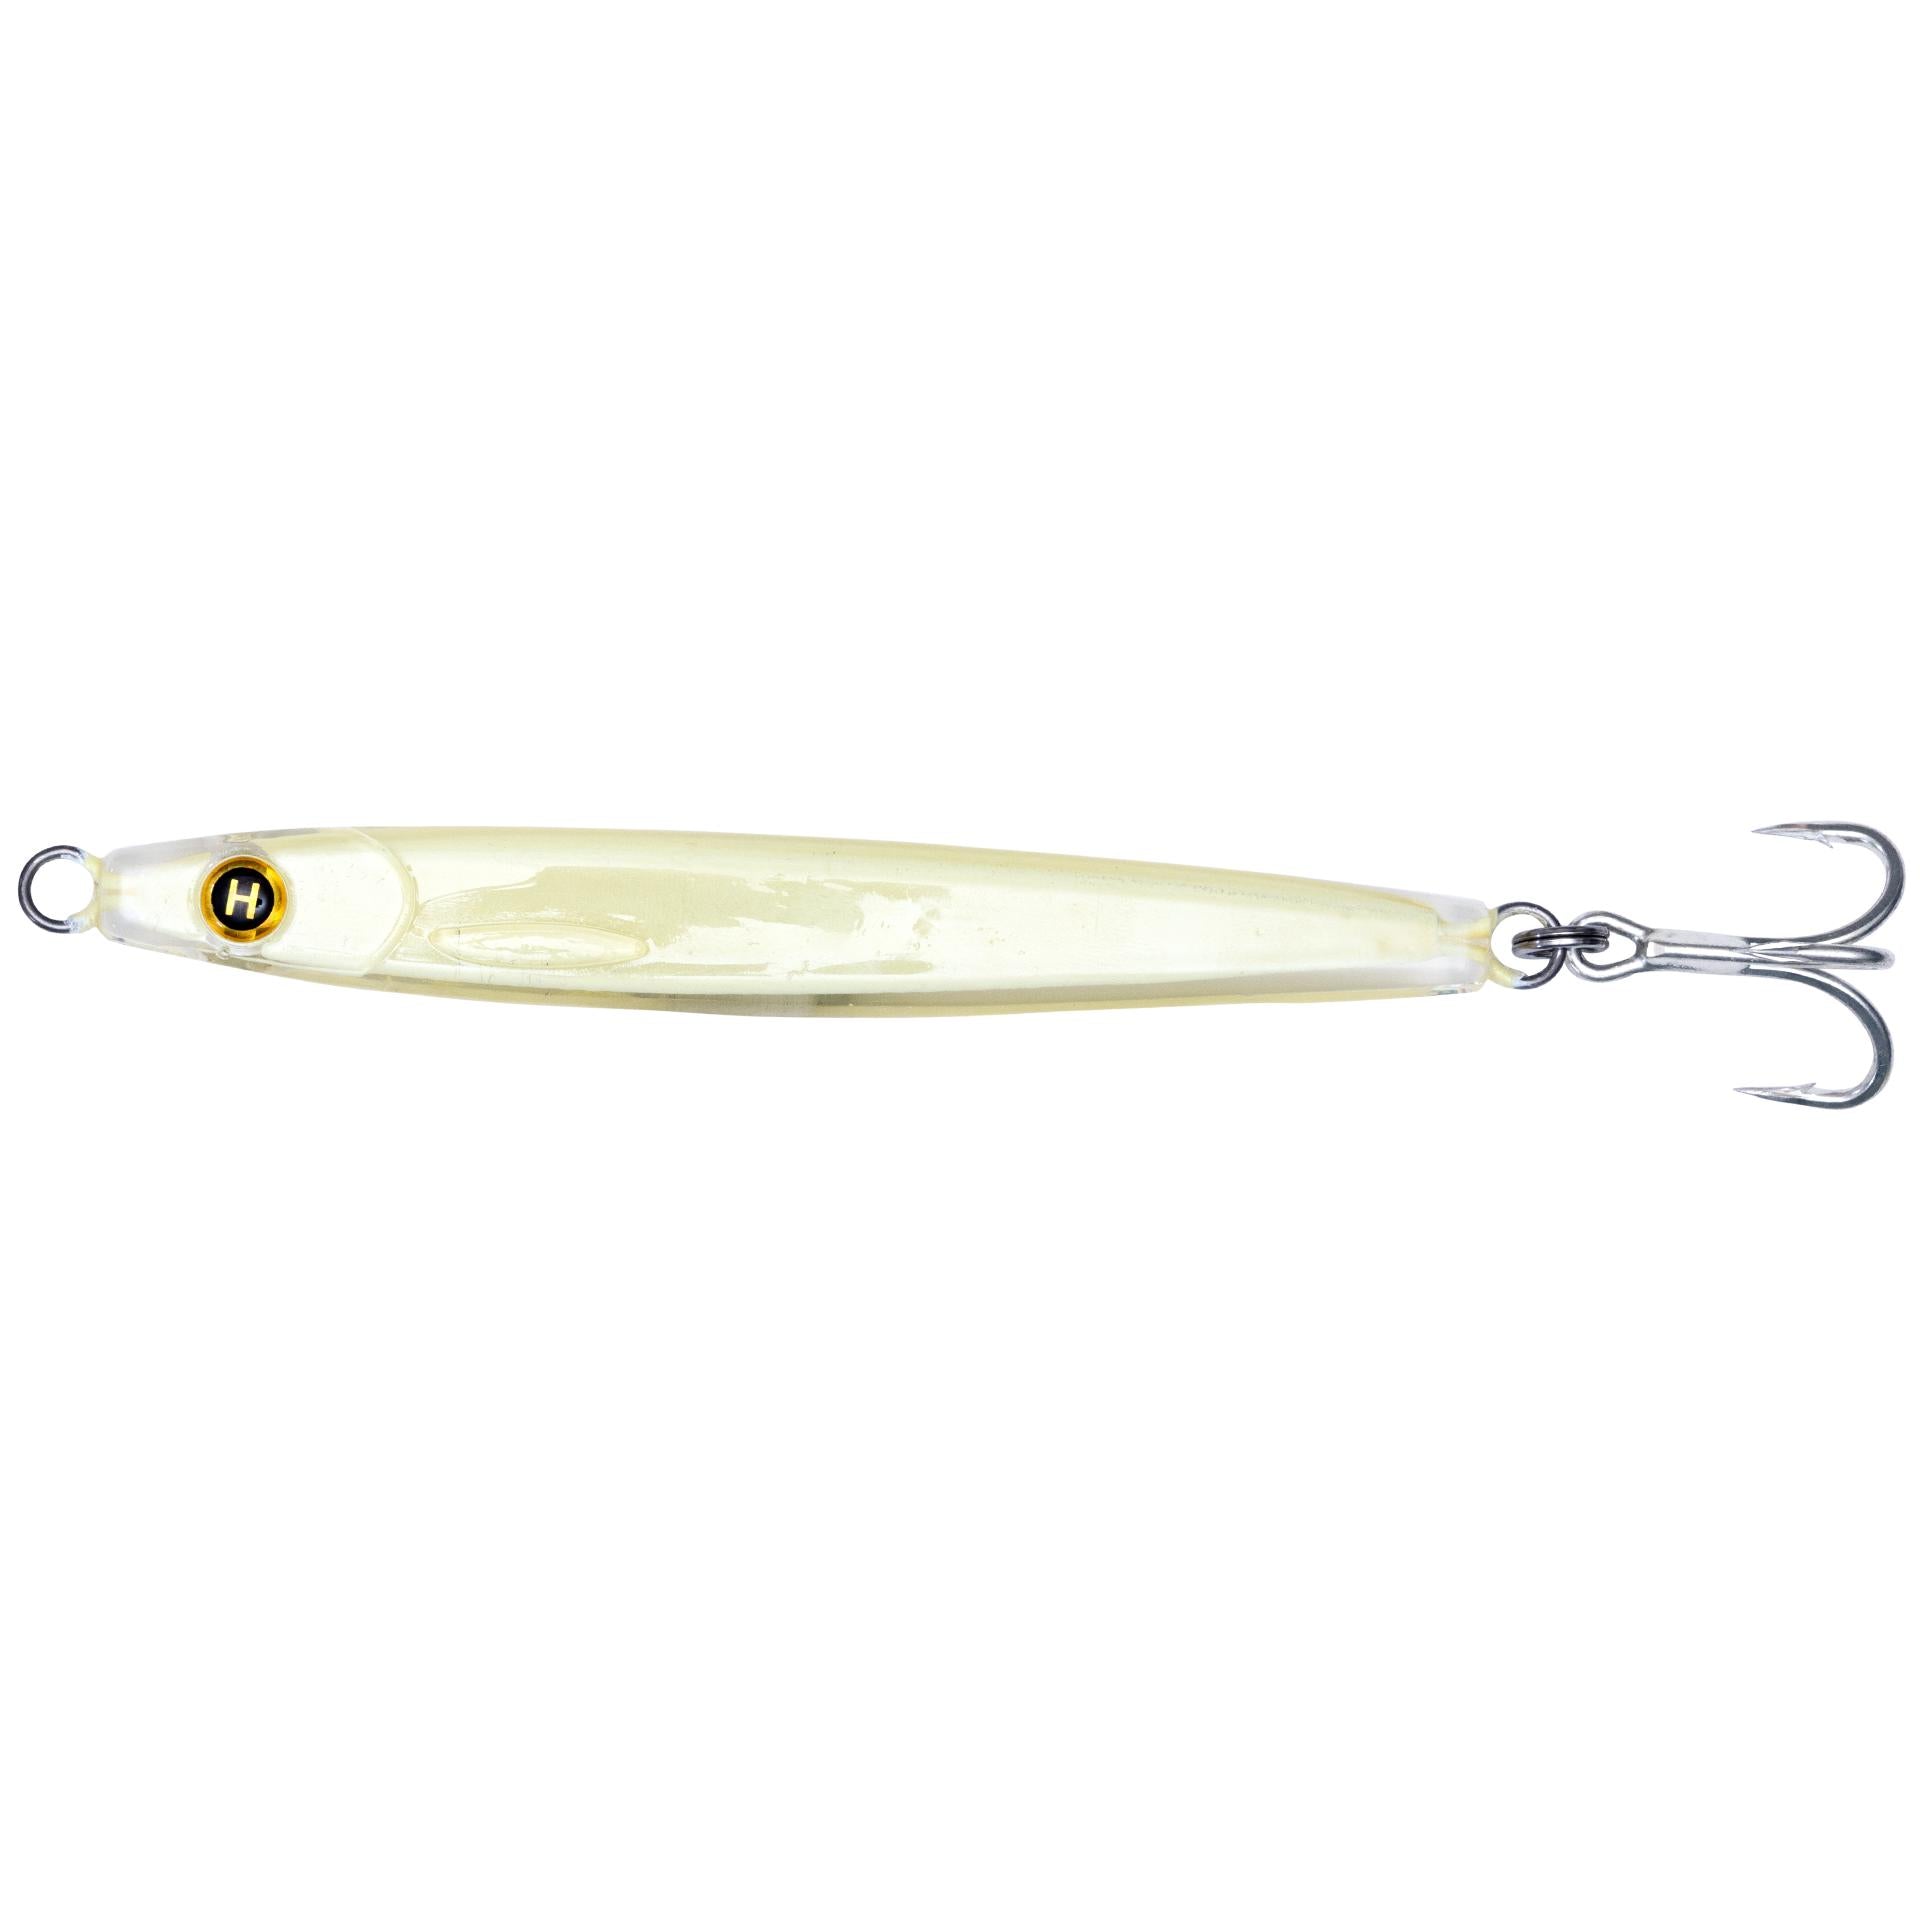  Epoxy Resin Fishing Jig Lure (1 Ounce) (Blue/Green Mack) :  Sports & Outdoors